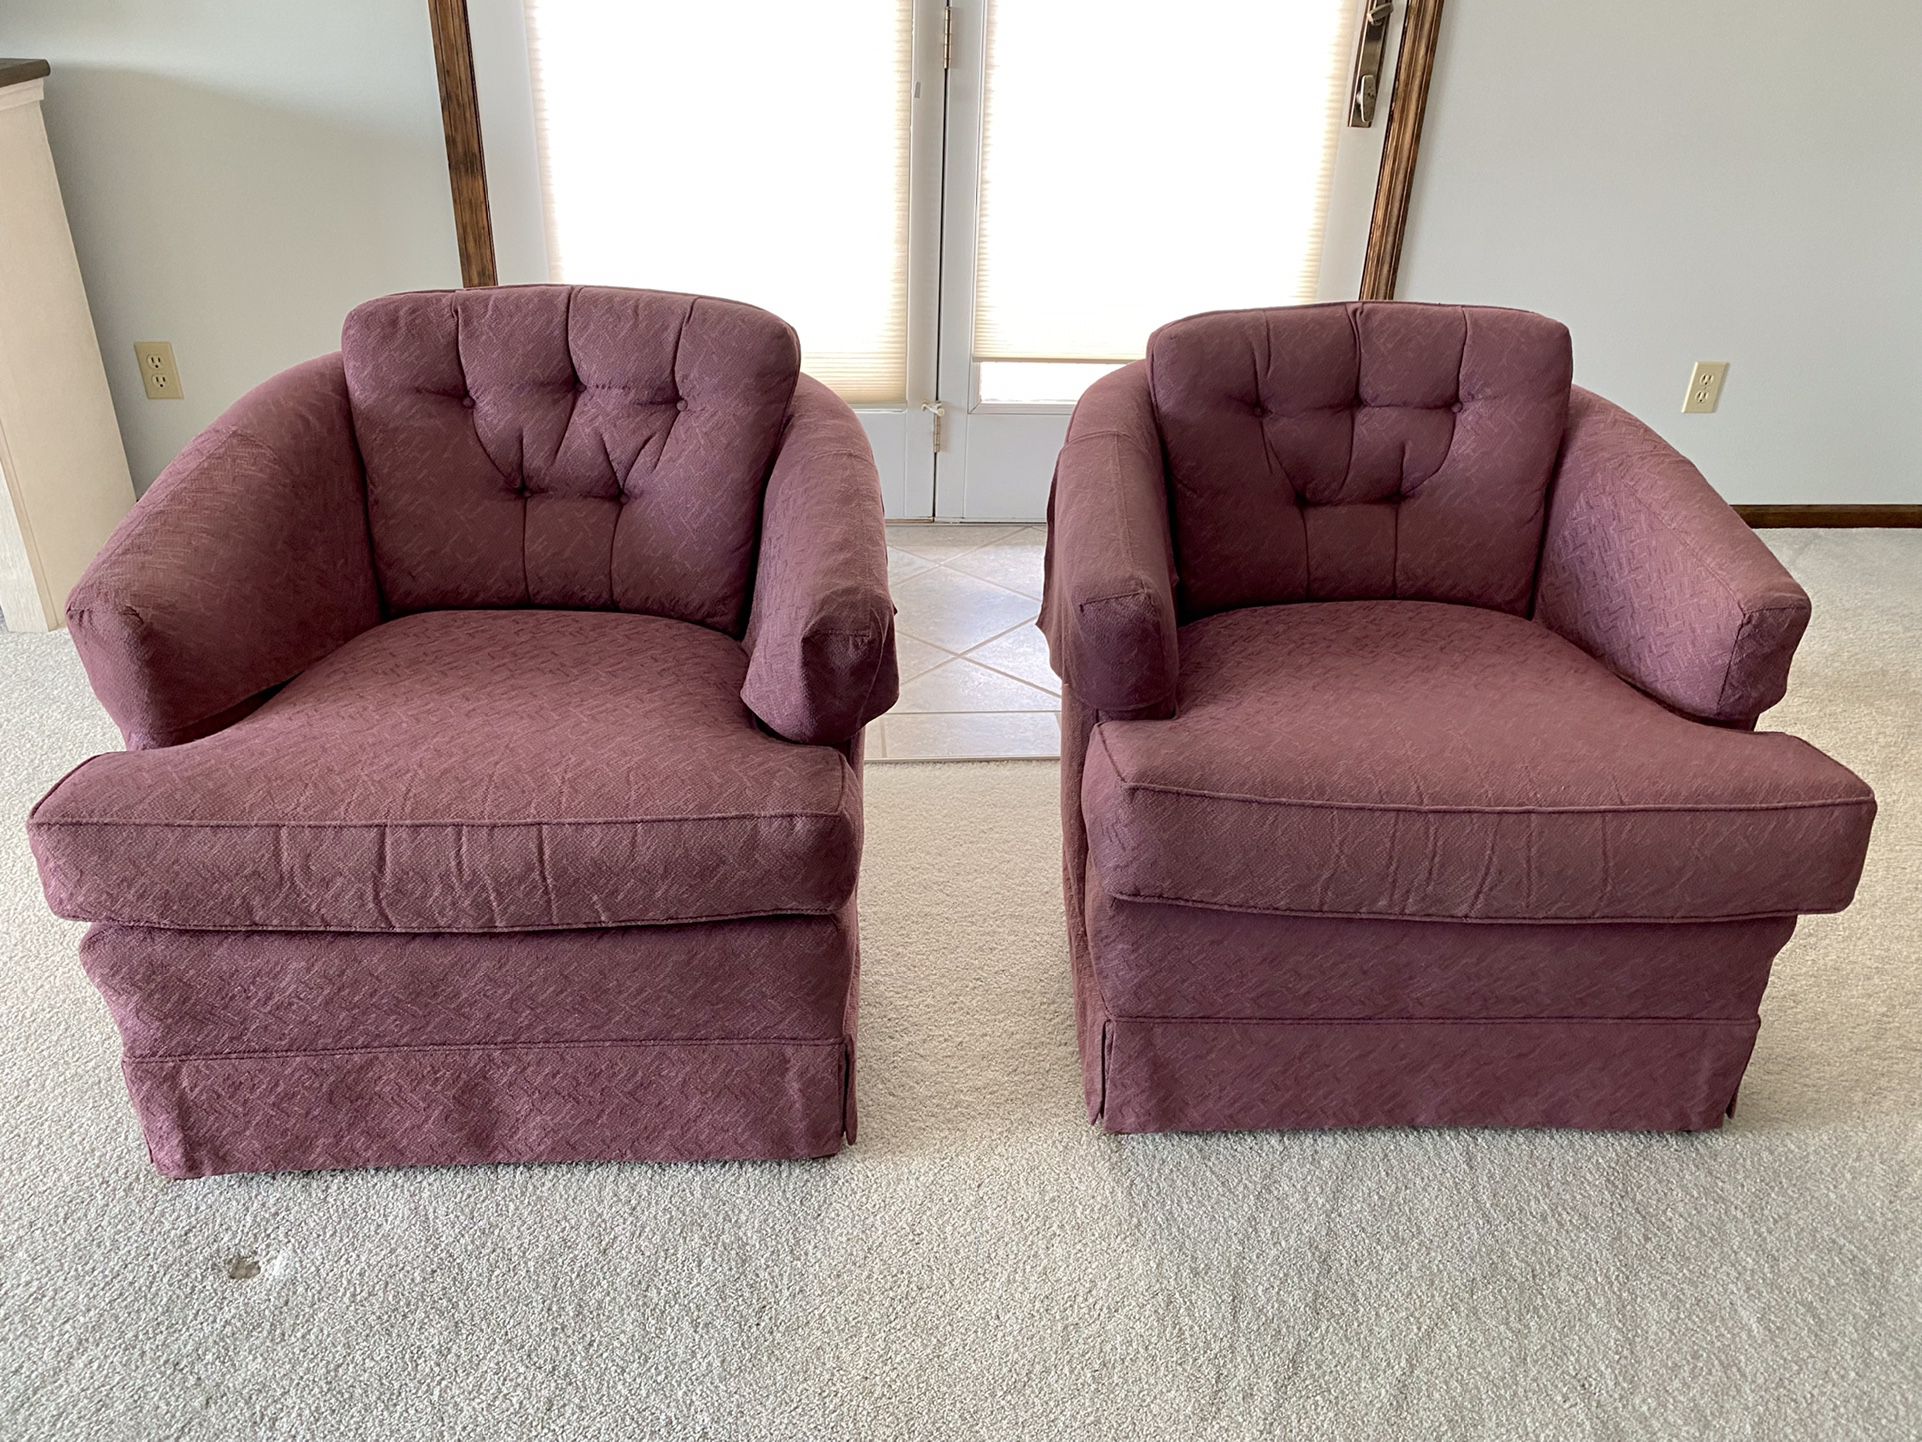 Two Accent Chairs Plum In Color  